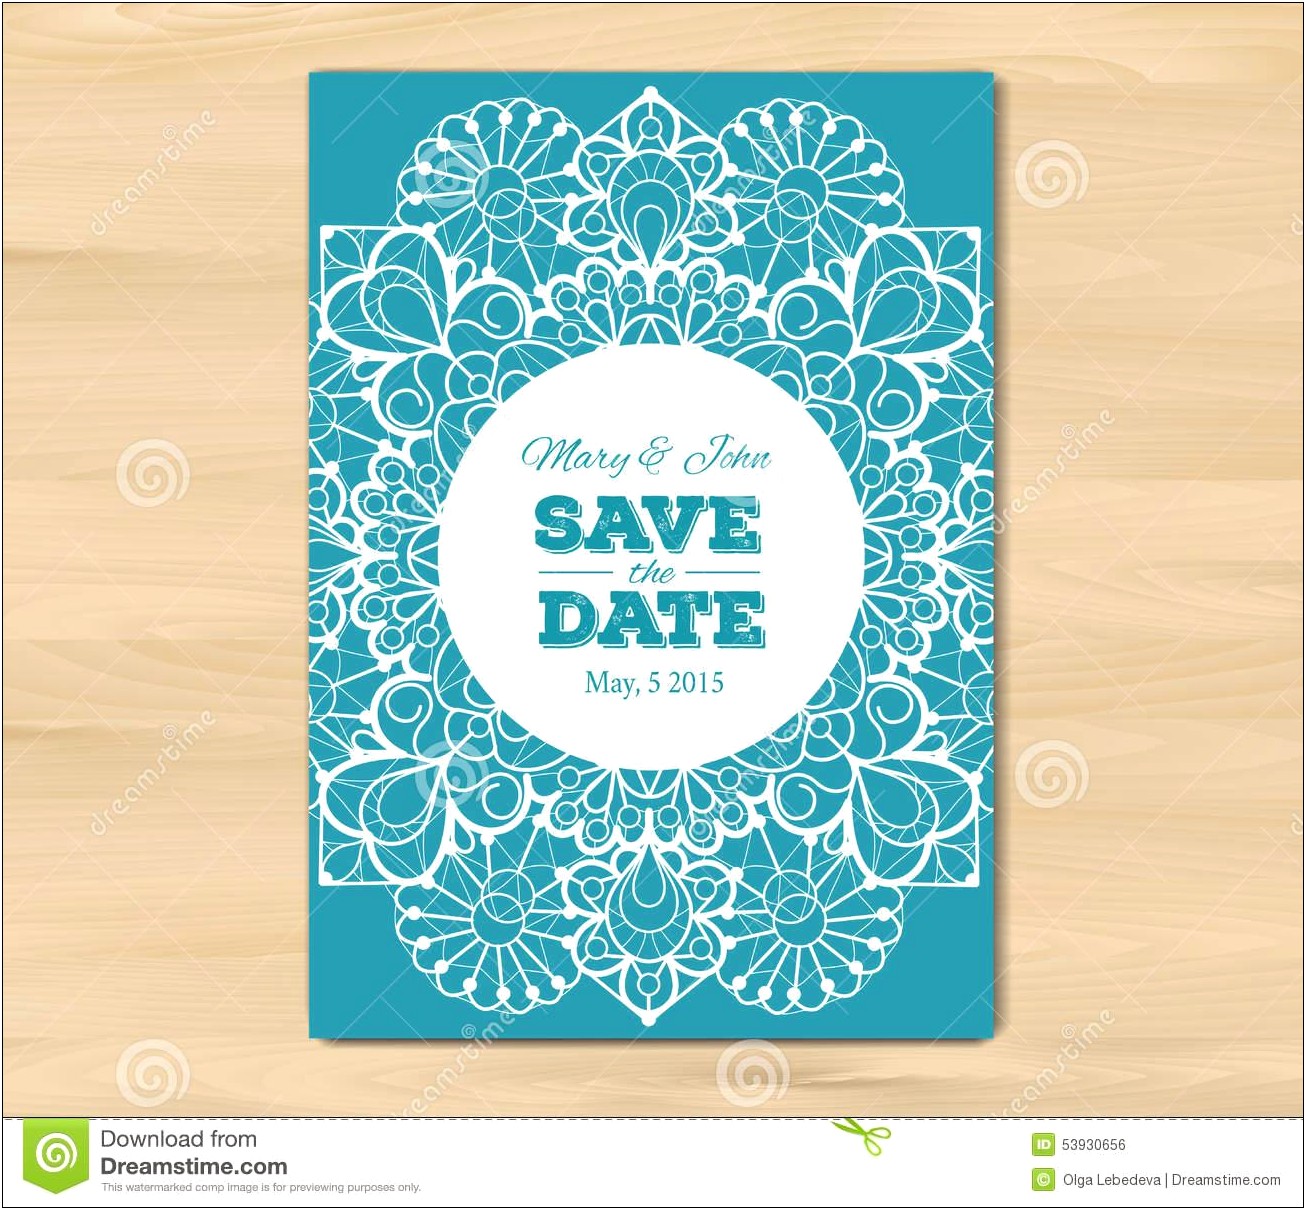 Save The Date Retirement Templates Free